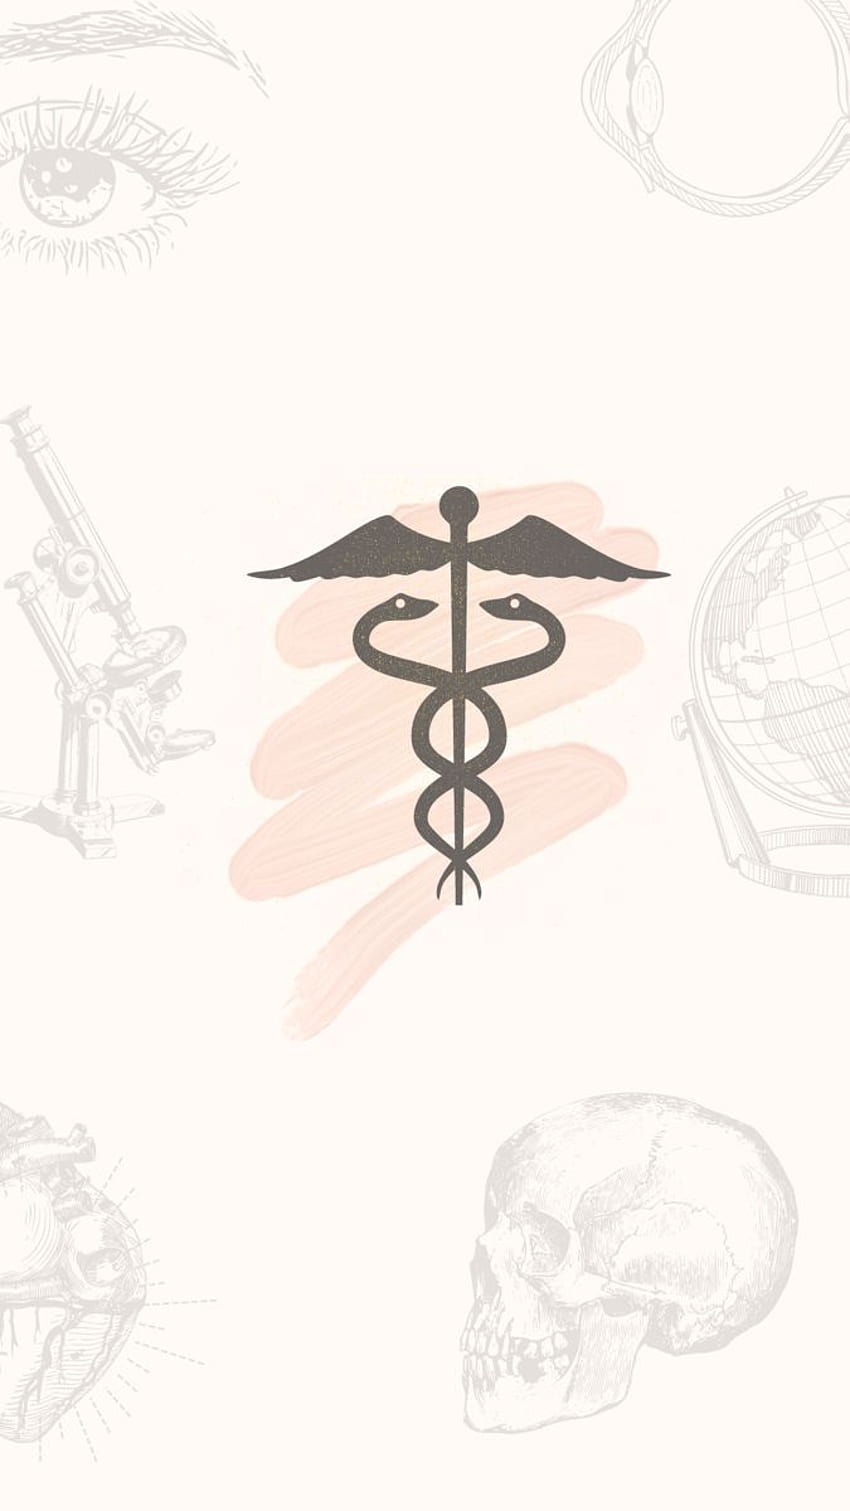 Medical caduceus symbol surrounded by various medical icons including an eye, microscope, globe, and skull. - Nurse, medical